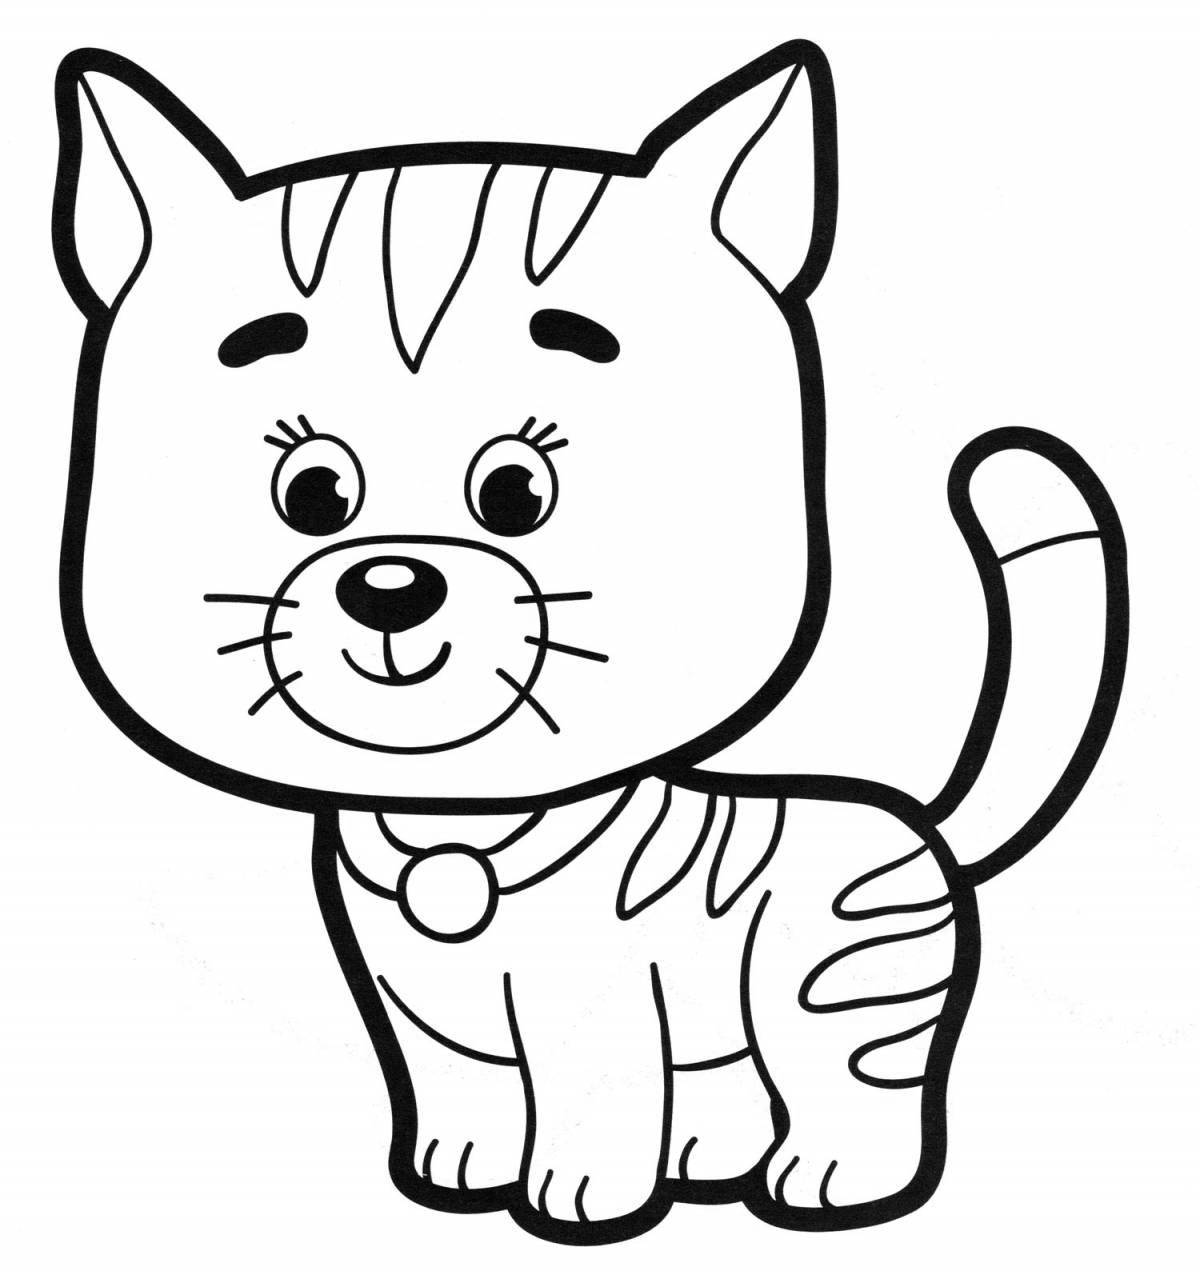 Fancy kitty coloring book for kids 4-5 years old